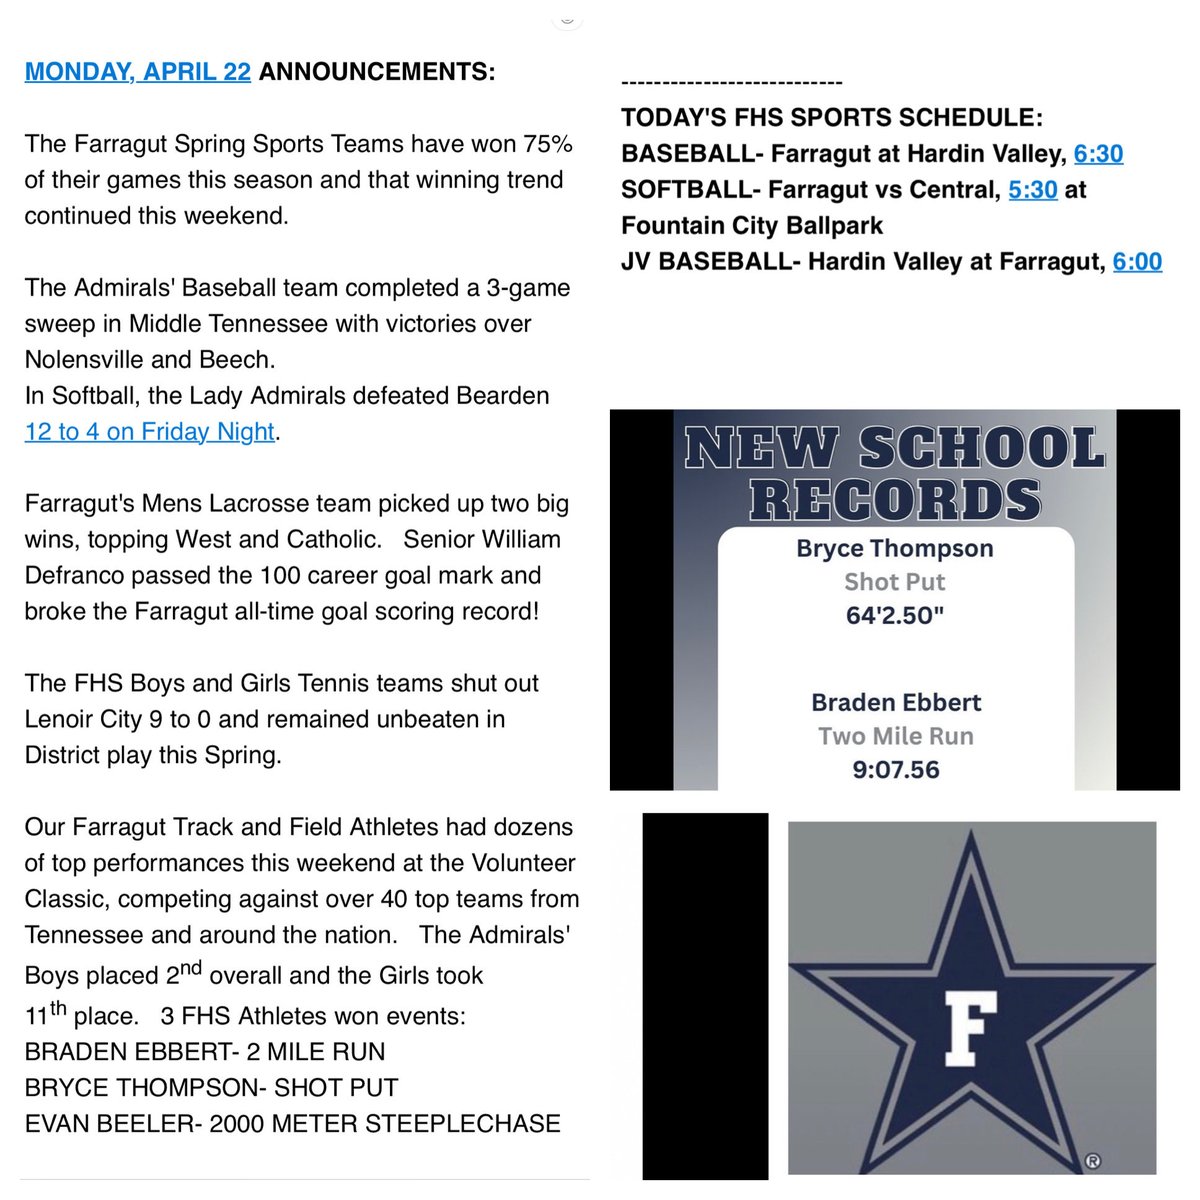 Here’s an Early Look at Monday Morning’s Farragut High School Sports Announcements ⚓️